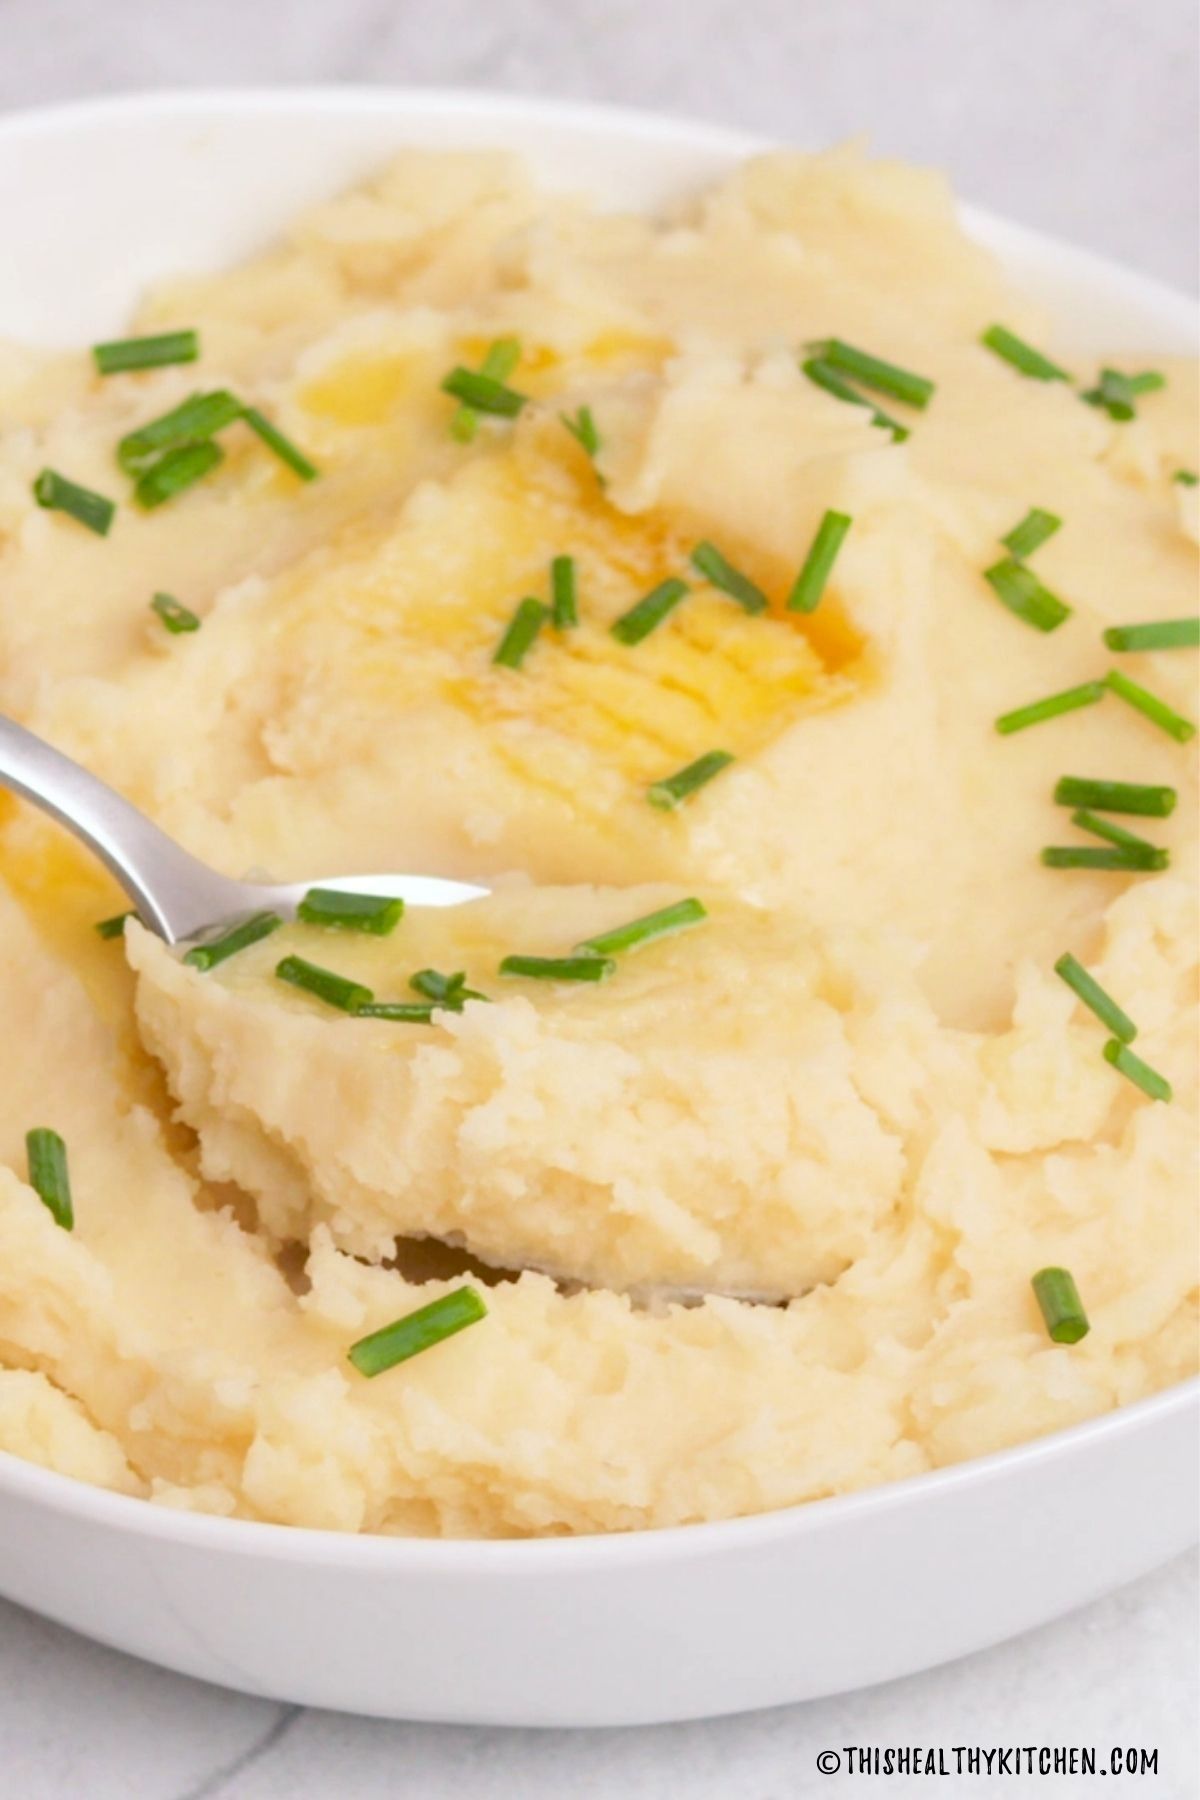 Spoon scooping up mashed potatoes from bowl.